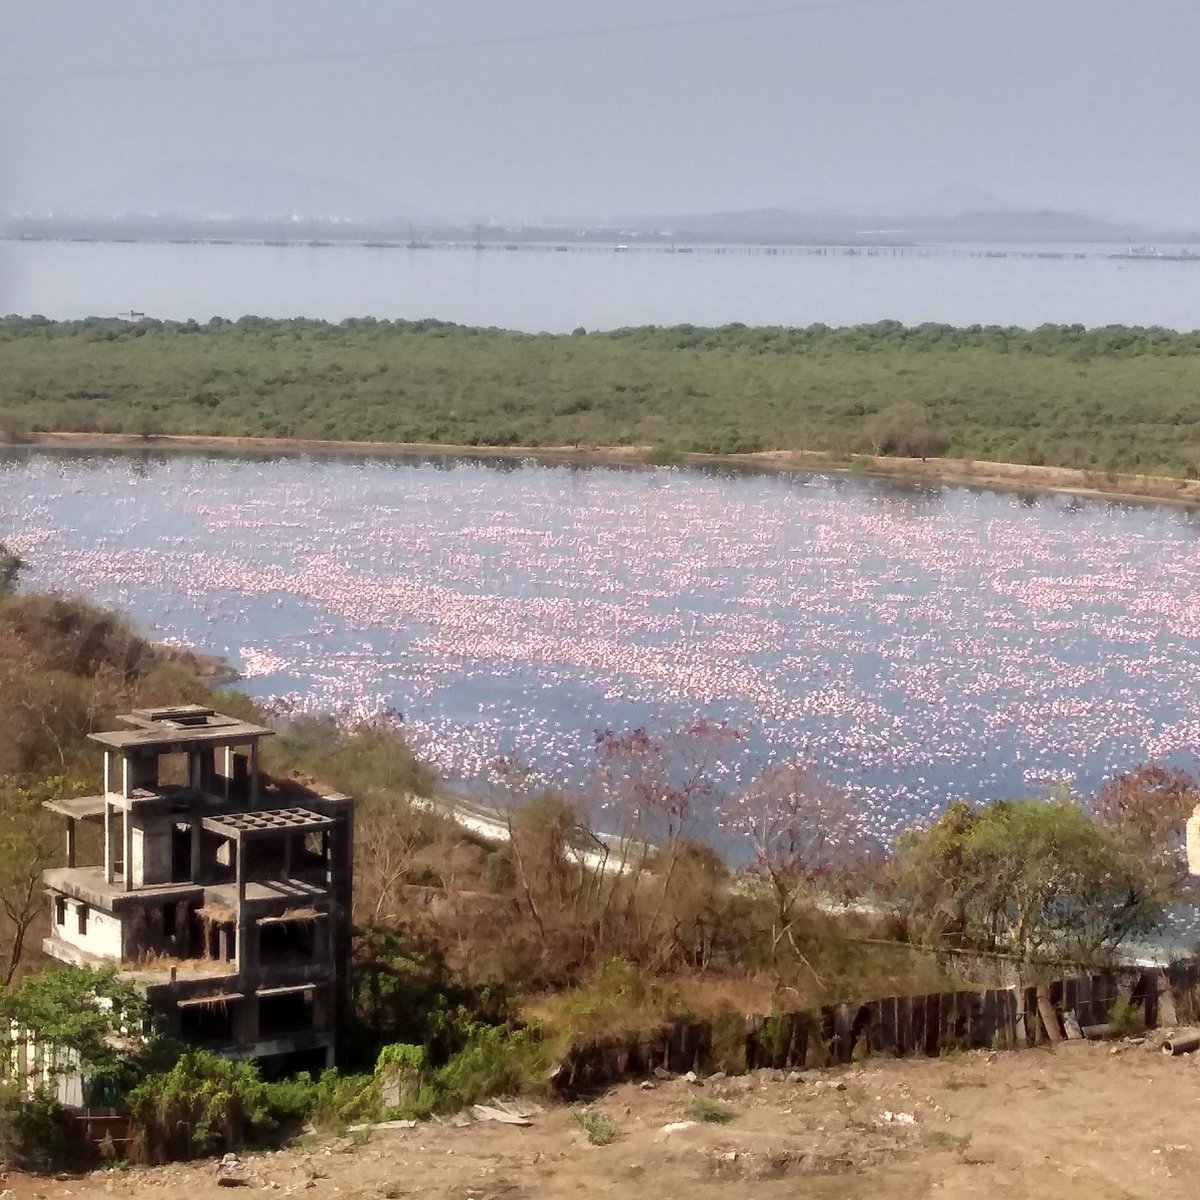 Picture of  #flamingos at Talawe  #Wetlands today frm my window. The ugly building in this picture is another scam by  @CIDCO_Ltd where  #judiciary had to stop the work .   @timesofindia story :  https://timesofindia.indiatimes.com/city/mumbai/HC-stays-Cidco-bosses-housing-plans/articleshow/786375.cms #KeepWetlands  #sayNoToGolfCourse  #cidcobuildernexus